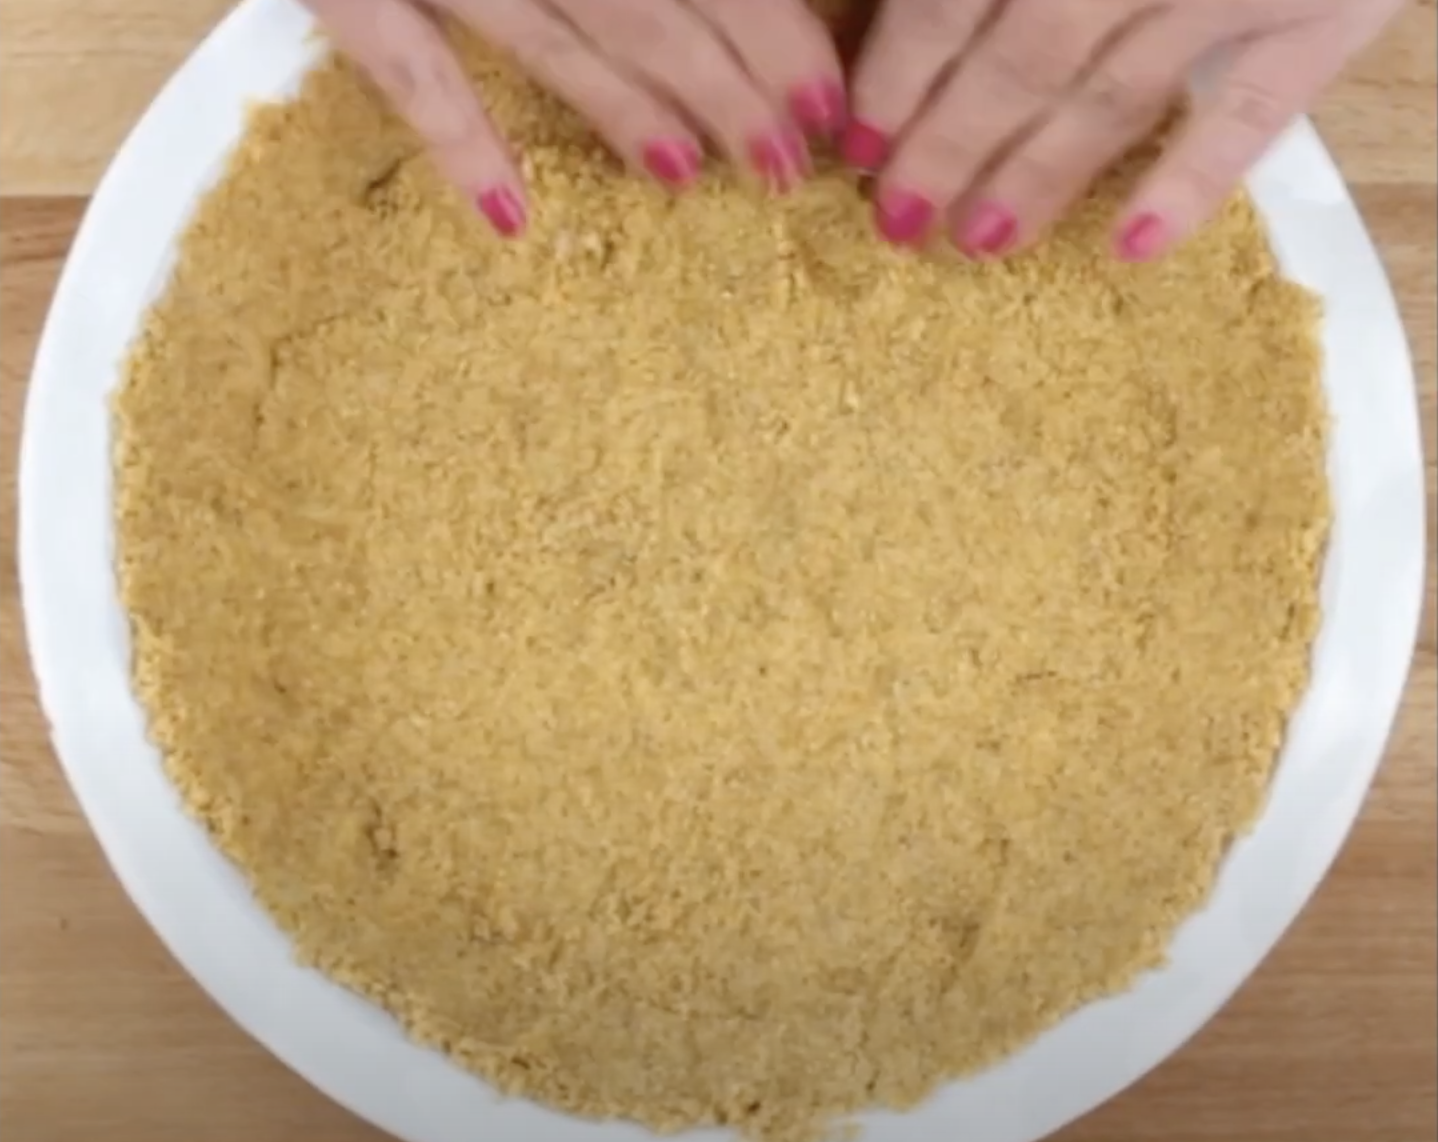 Crushed graham crackers mixed with butter being flattened in a pie dish making a homemade pie crust for key lime pie